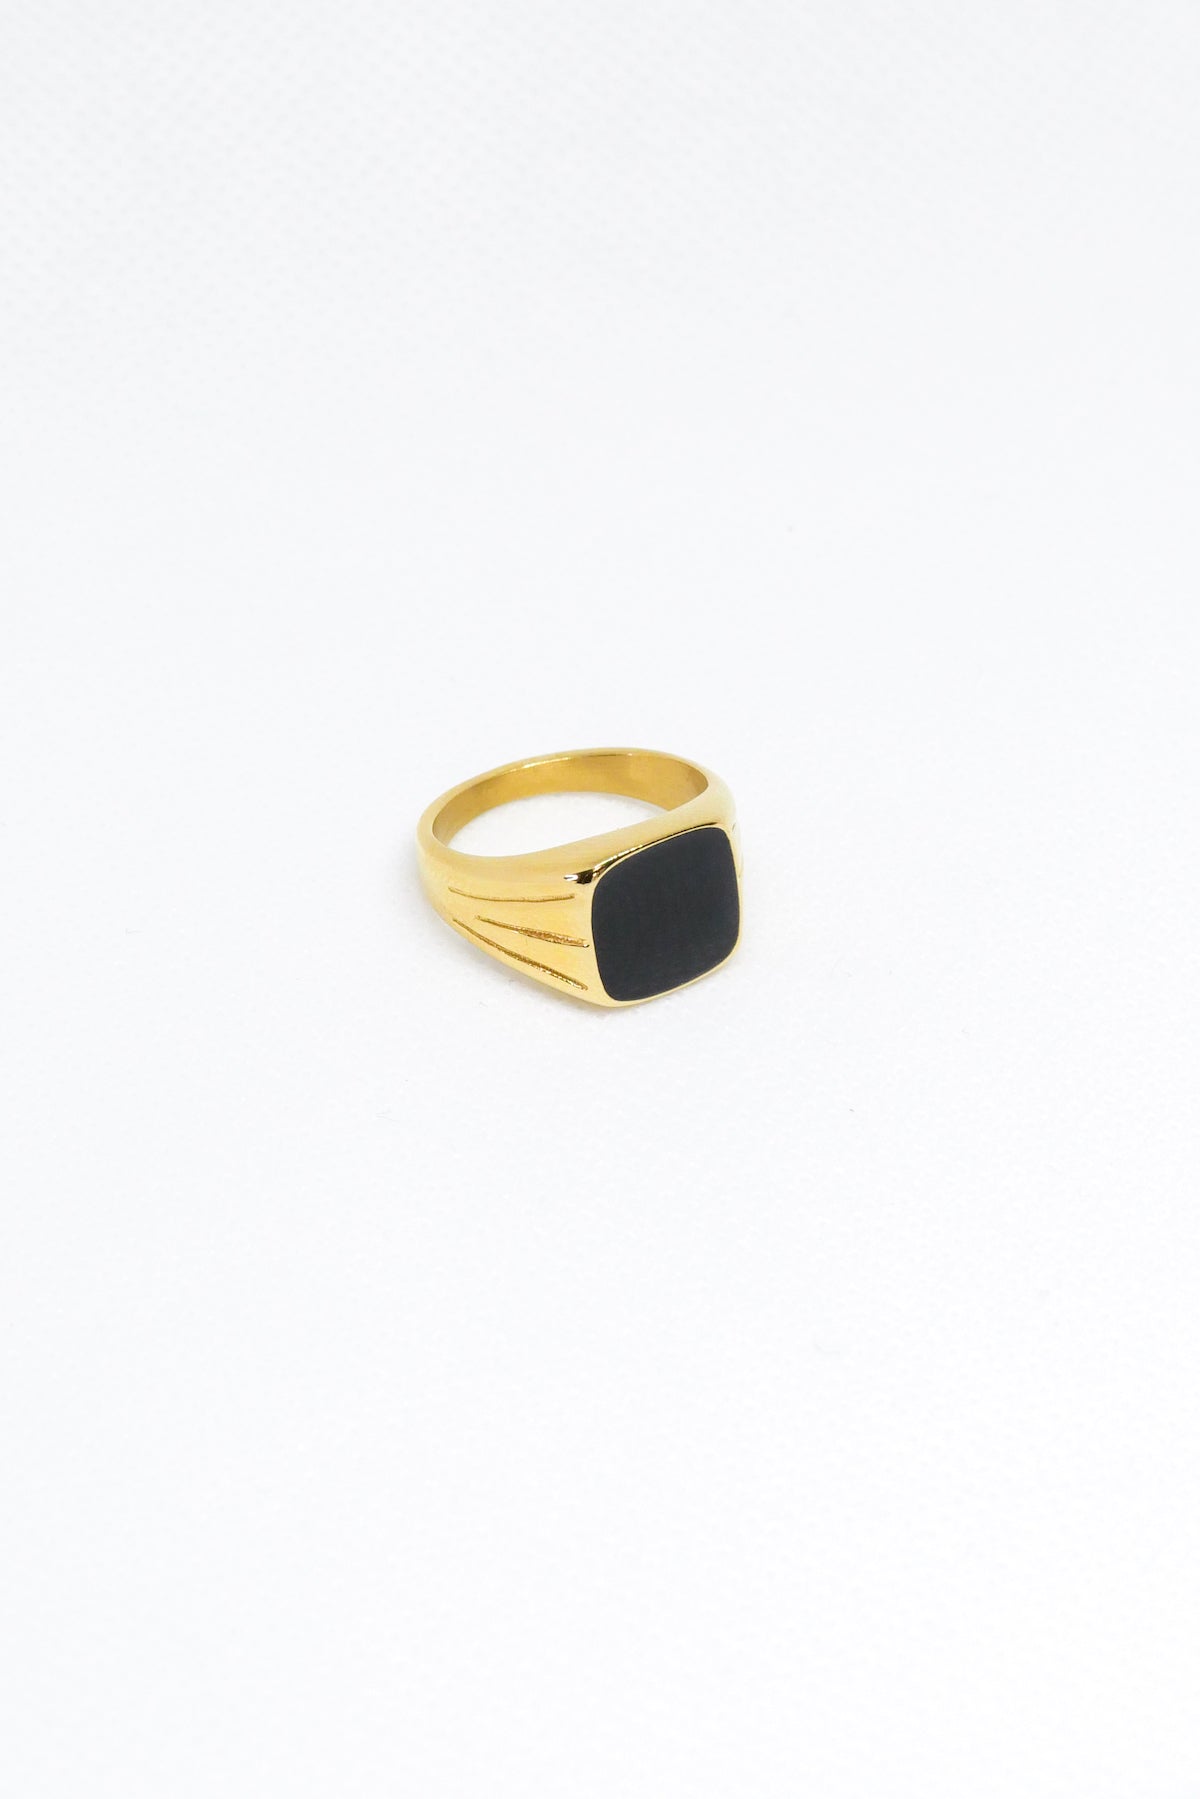 Onyx ring at 45 degree angle view on white background 